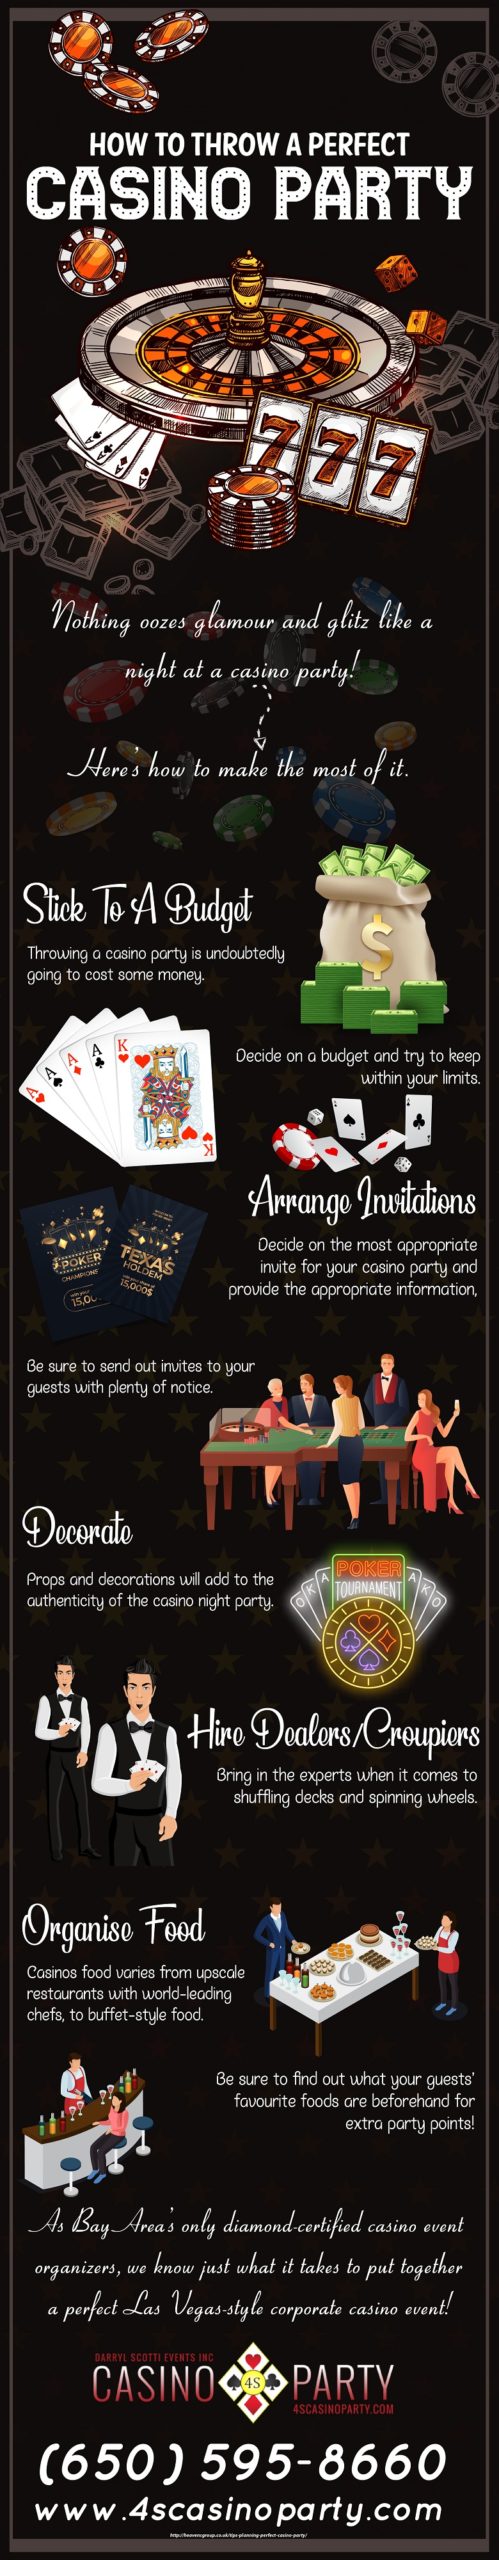 perfect casino party tips